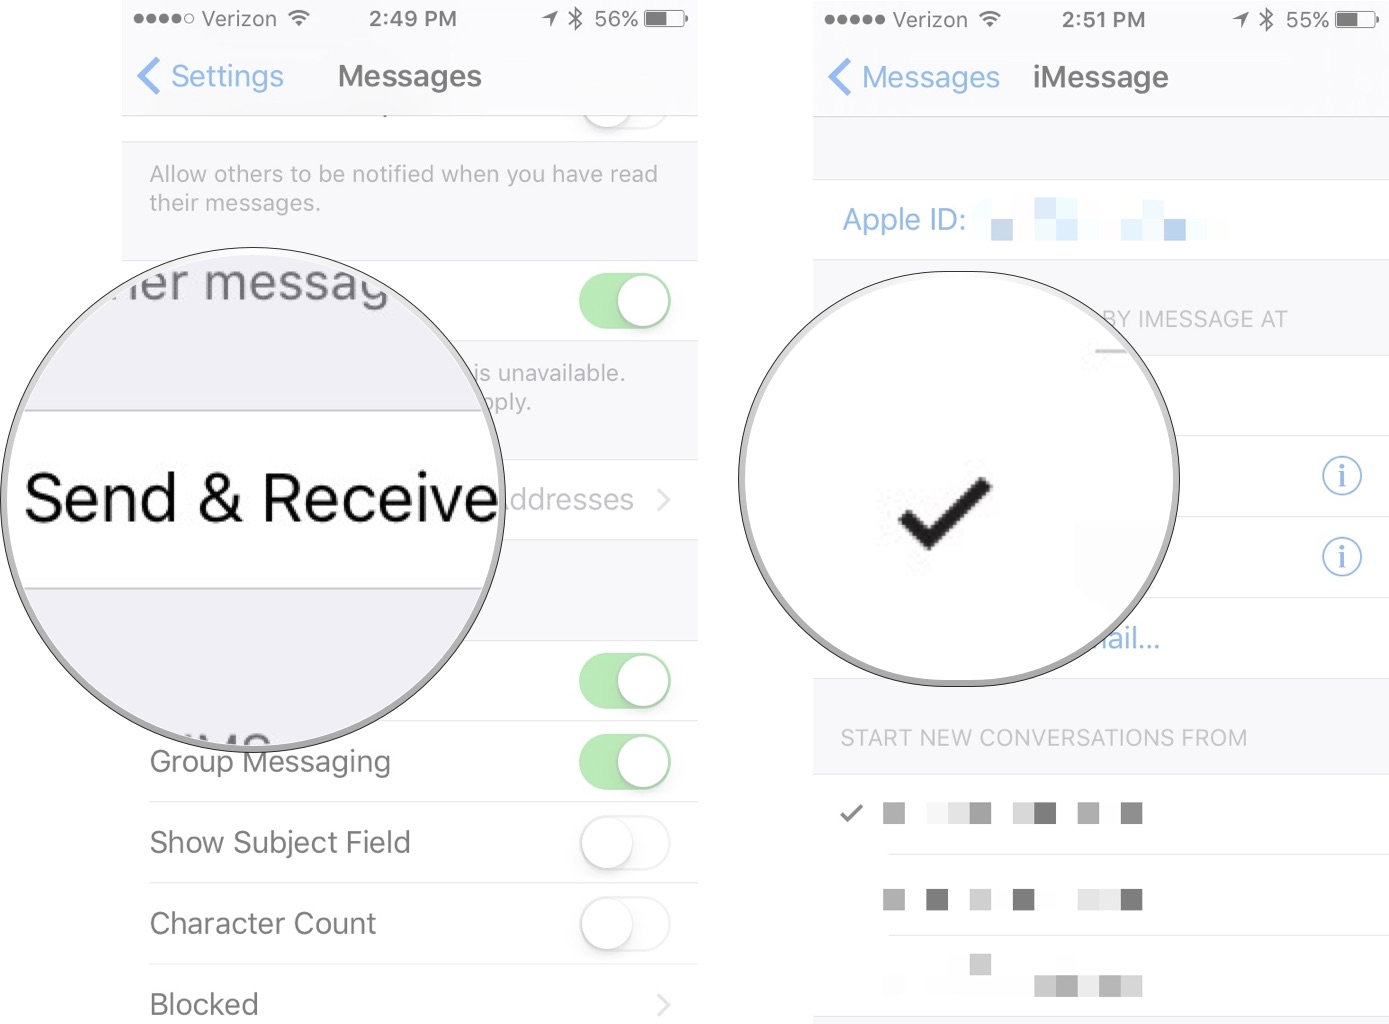 Remove email address from iMessage, showing how to tap Send & Receive, then tap the email address you want to disable for iMessage so that the check mark disappears